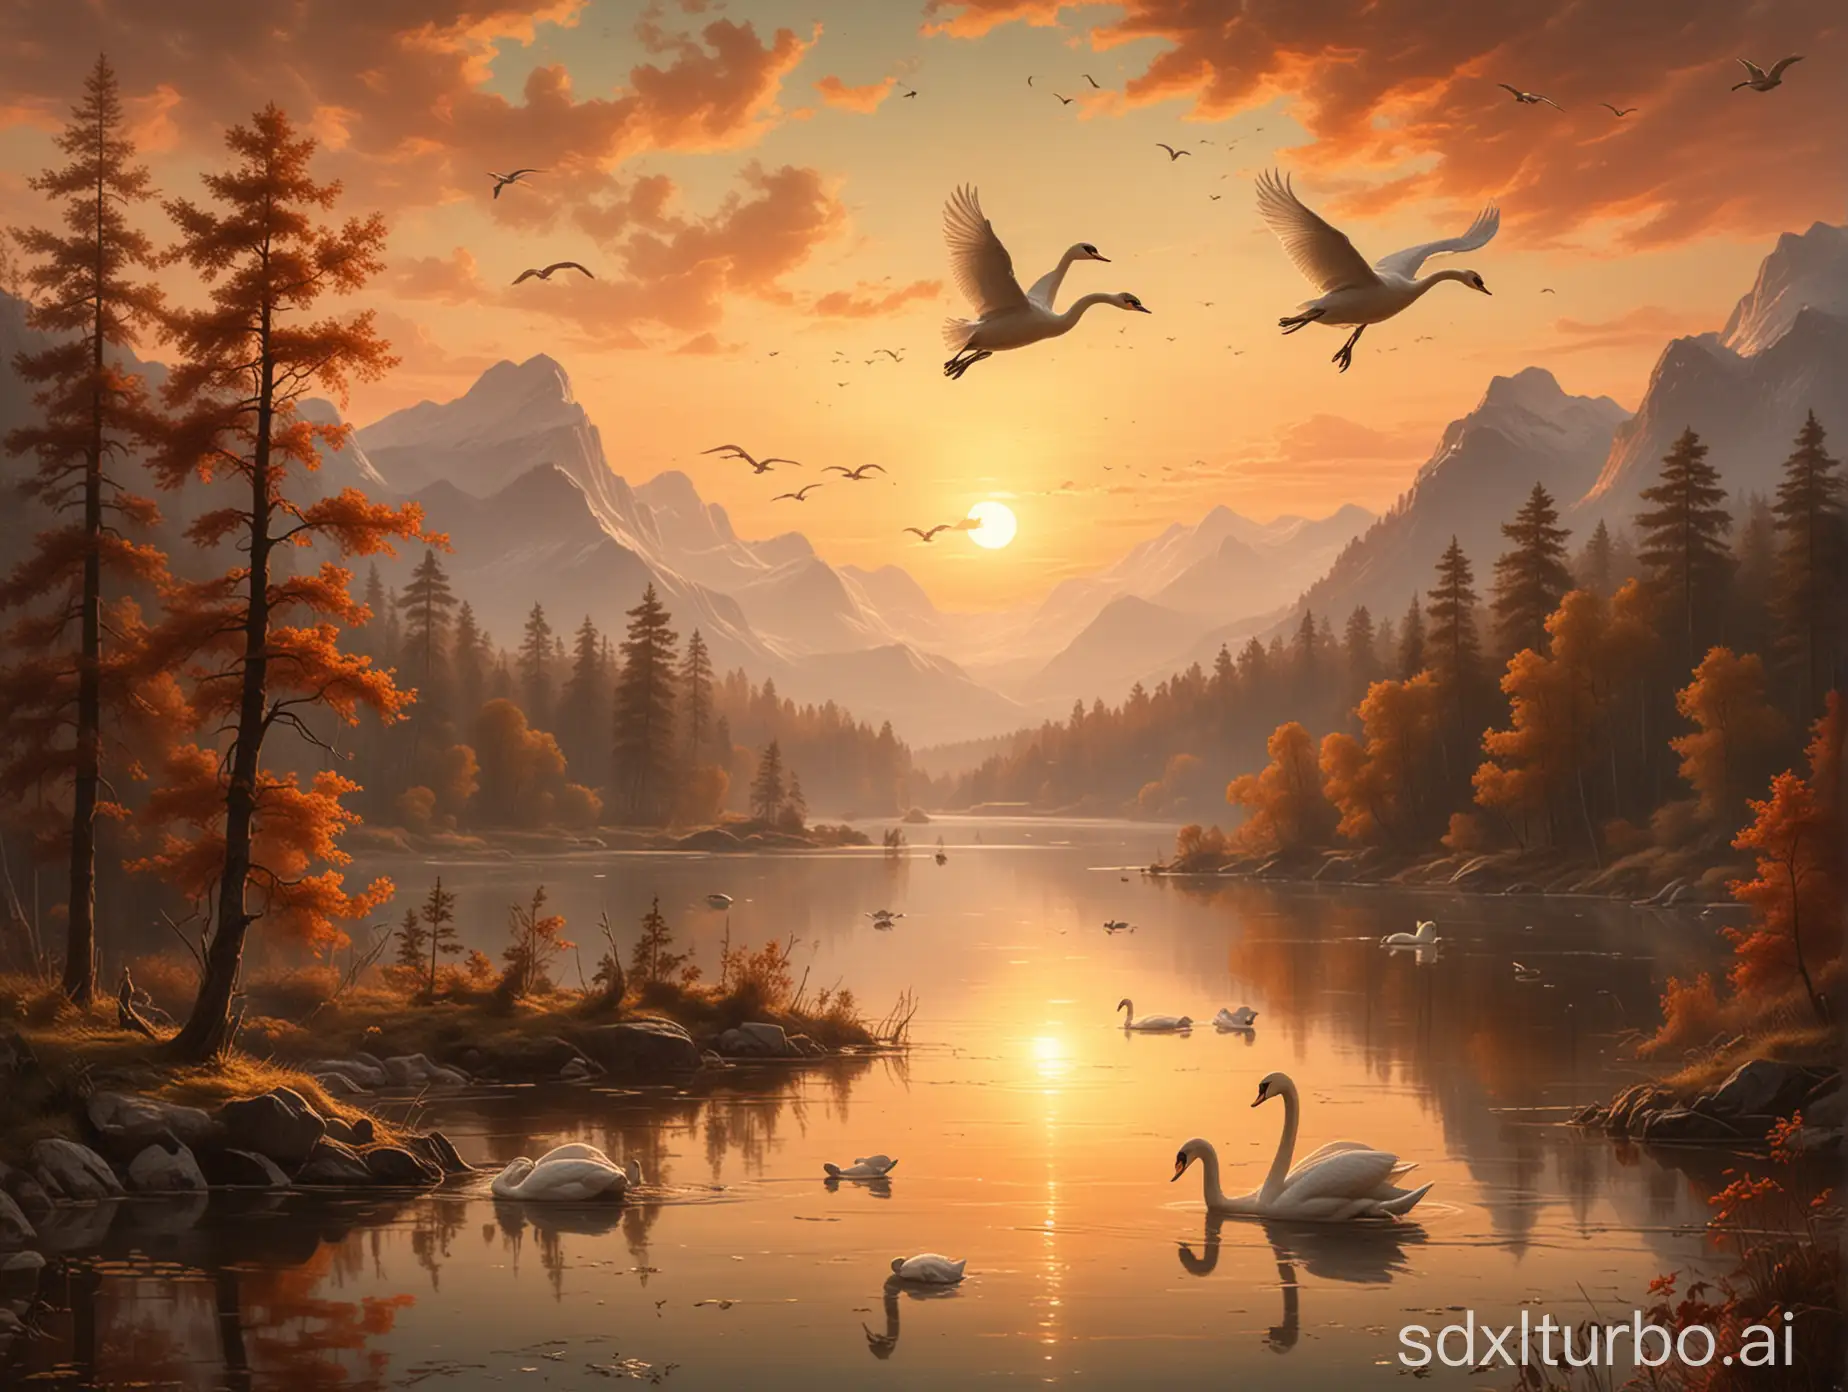 Majestic-Swans-Soaring-at-Sunset-over-Forests-Mountains-and-Lakes